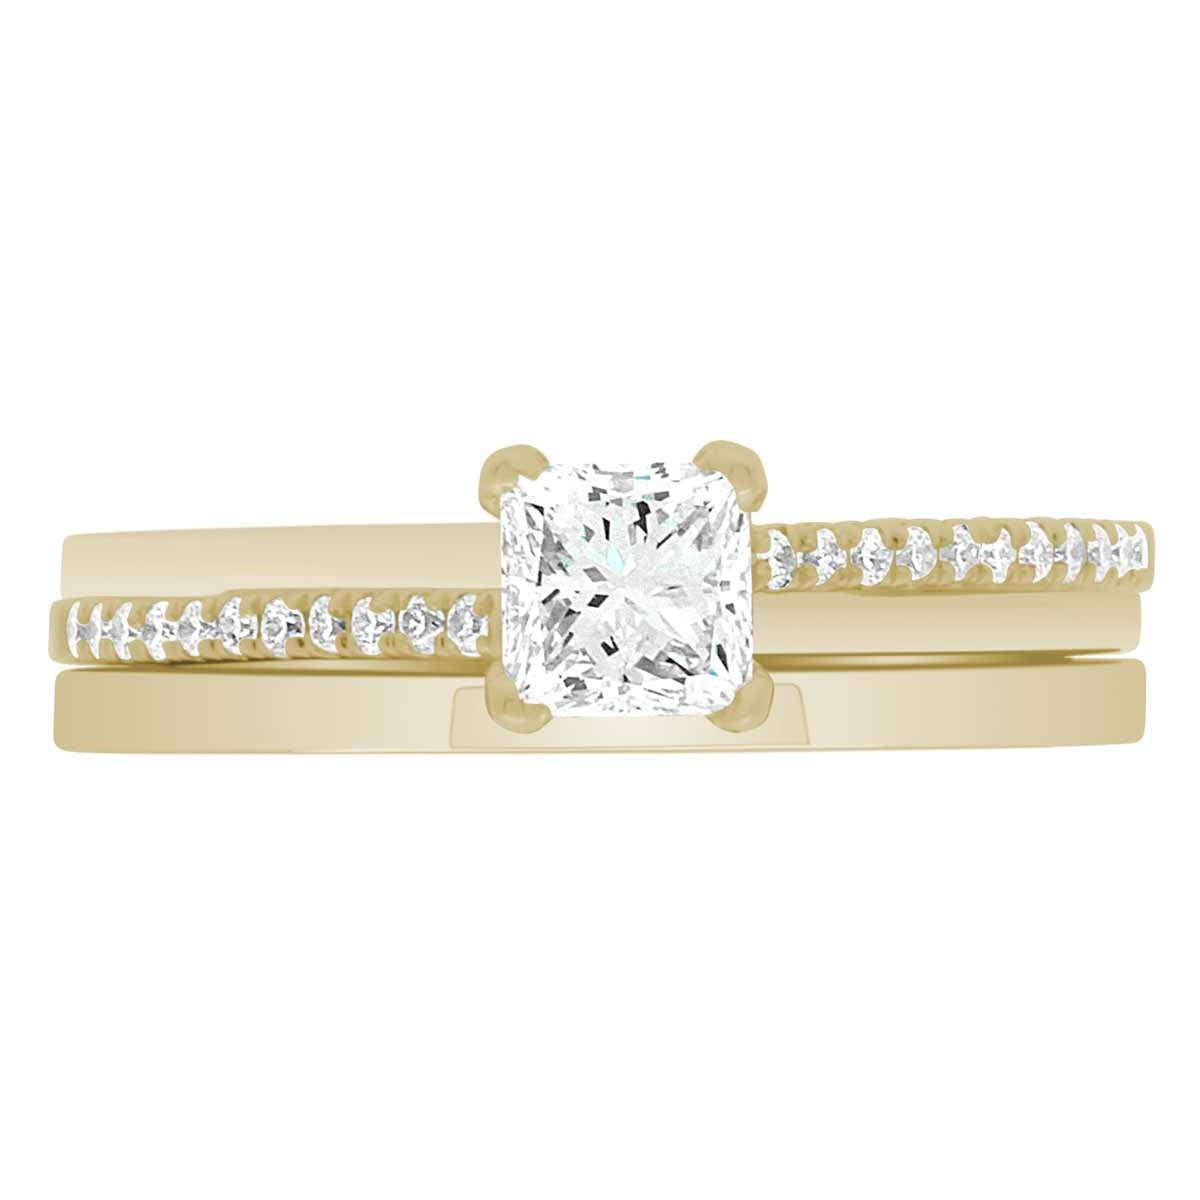 Promise Ring Style made from yellow gold pictured with a plain wedding ring